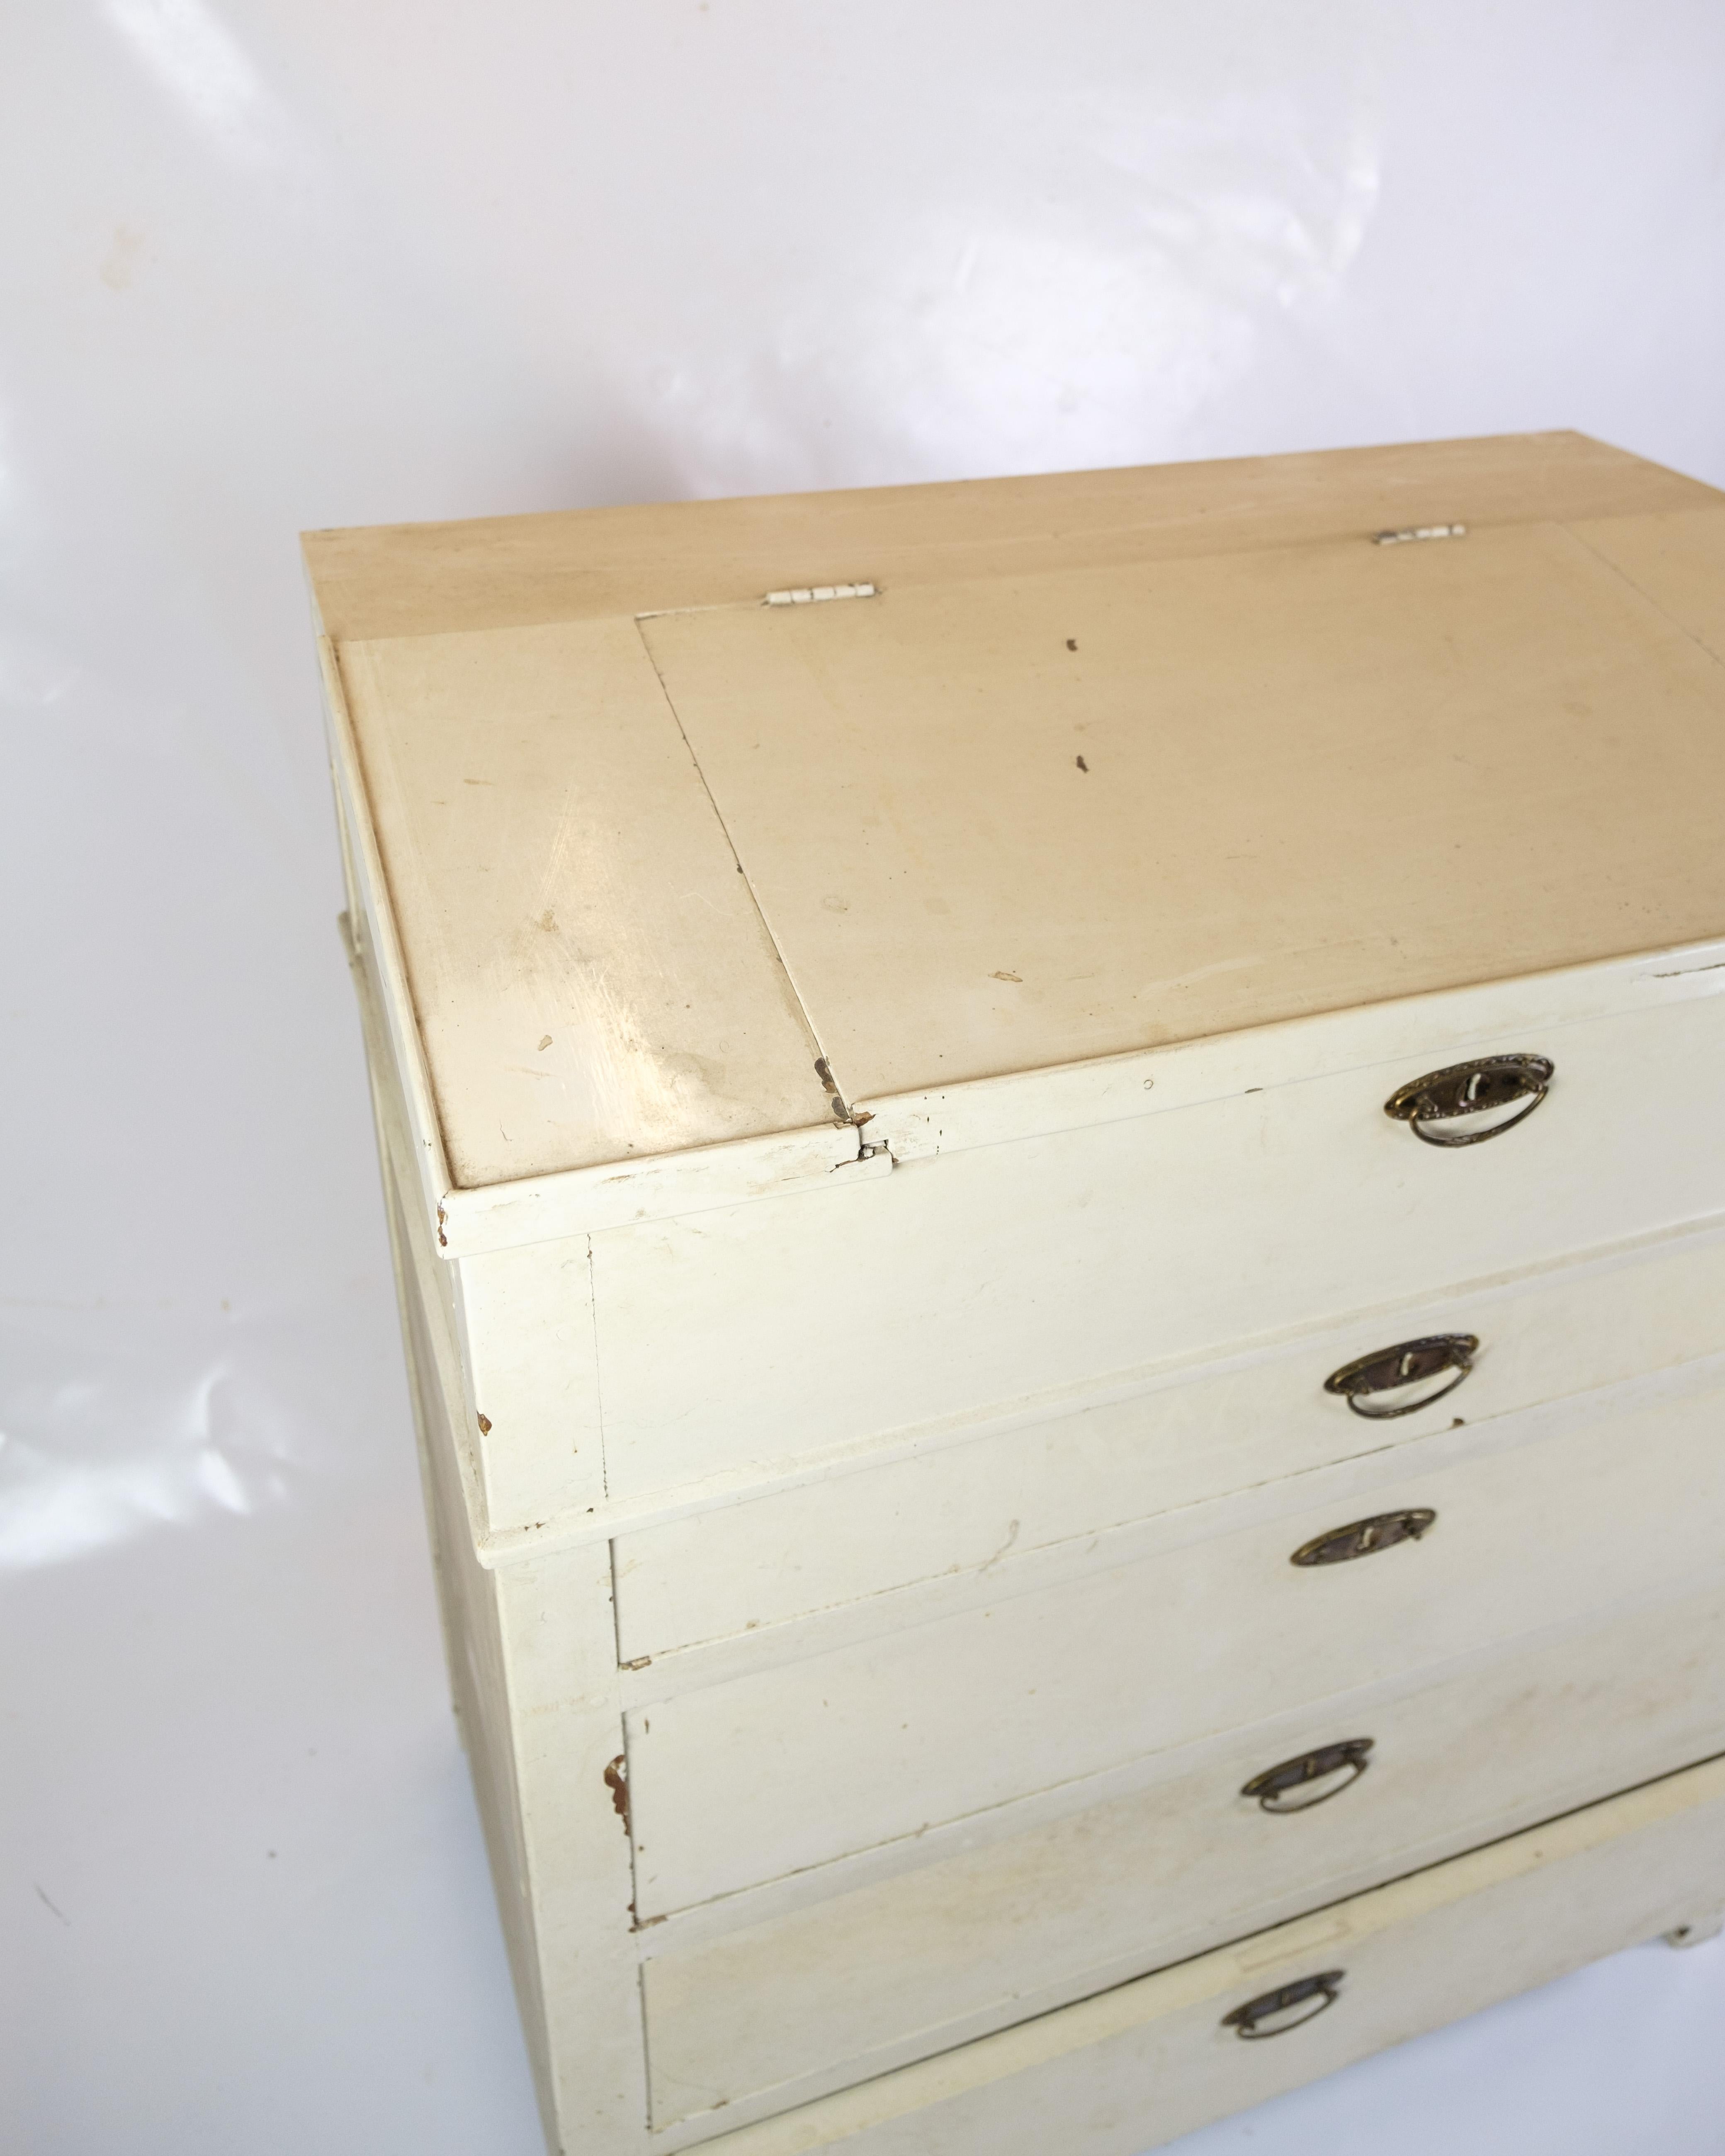 Wood Antique Chest Of Drawers/Desk Painted White From 1890s For Sale